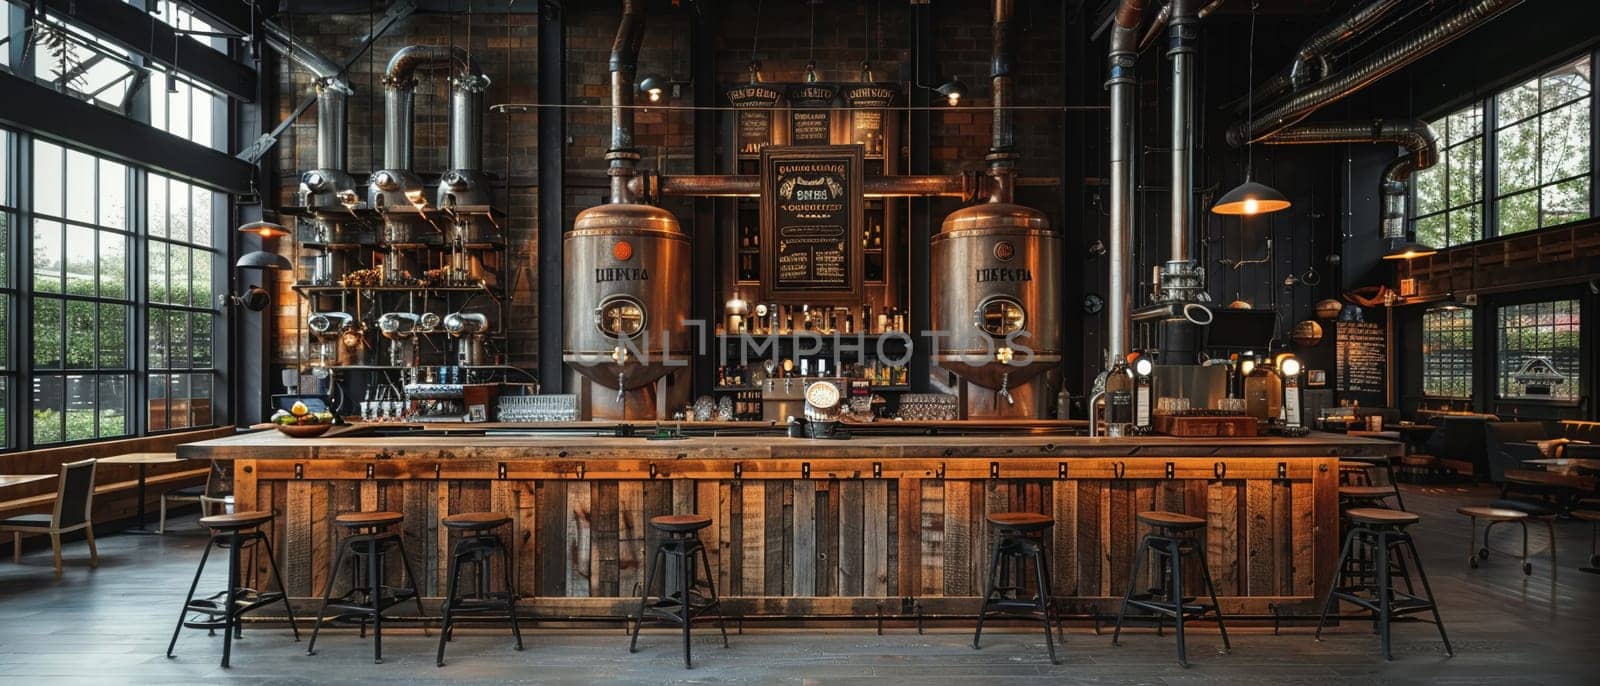 Industrial-style brewery with exposed pipes and a bar made from reclaimed wood